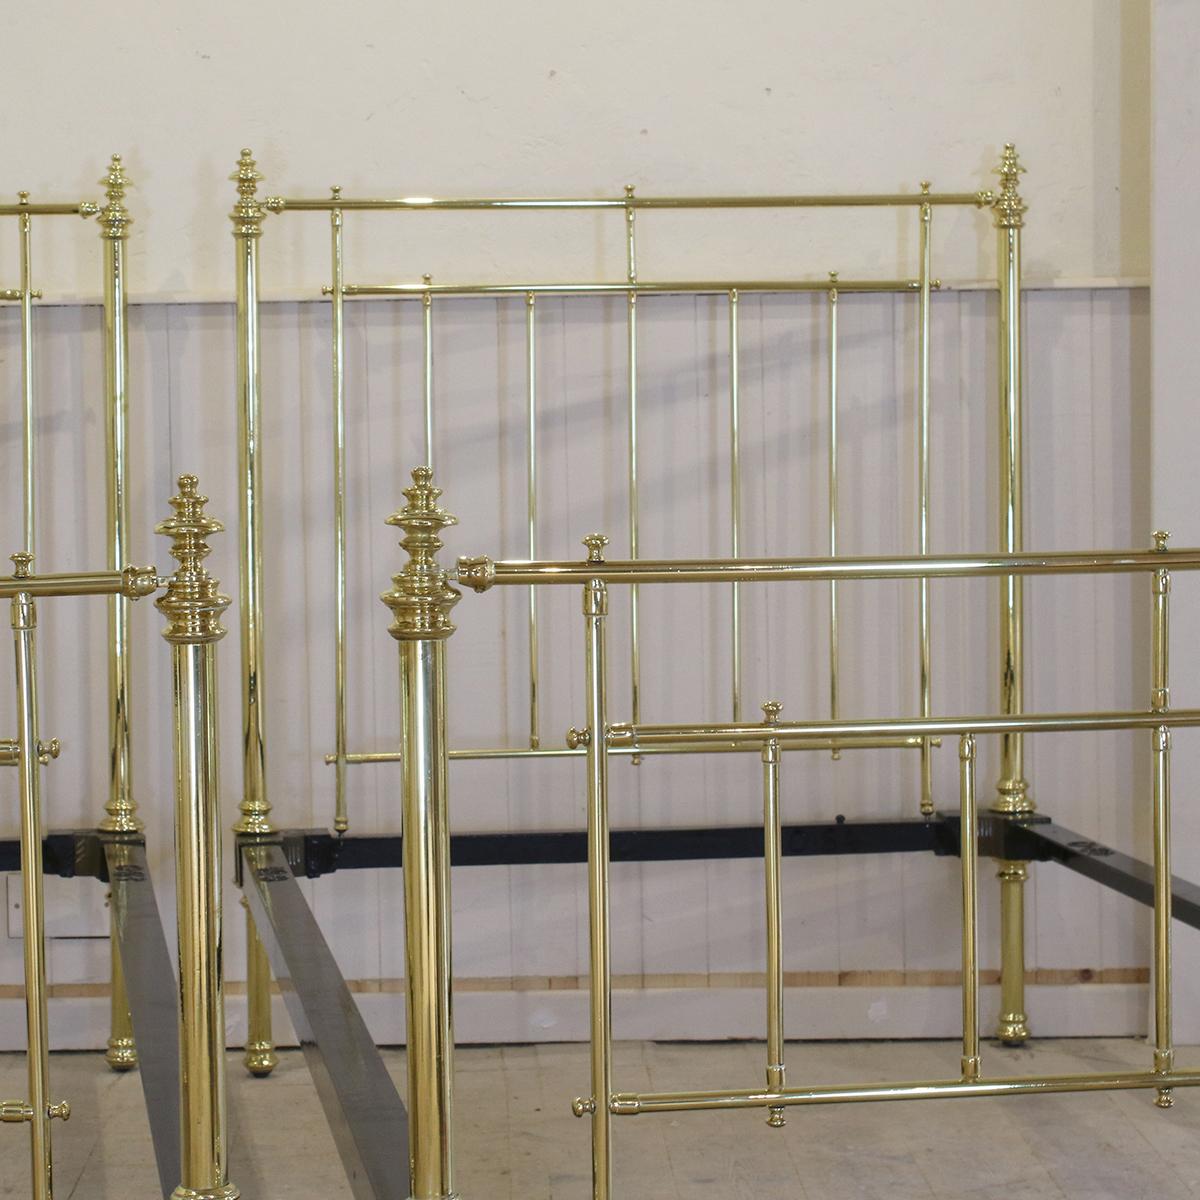 A matching pair of twin all brass antique beds in brass with fine brass panels and decorative cast finials.

These beds accept 42 inch wide bases and mattresses (large single - 3ft 6in).

The price is for the bed frames alone. The bases,